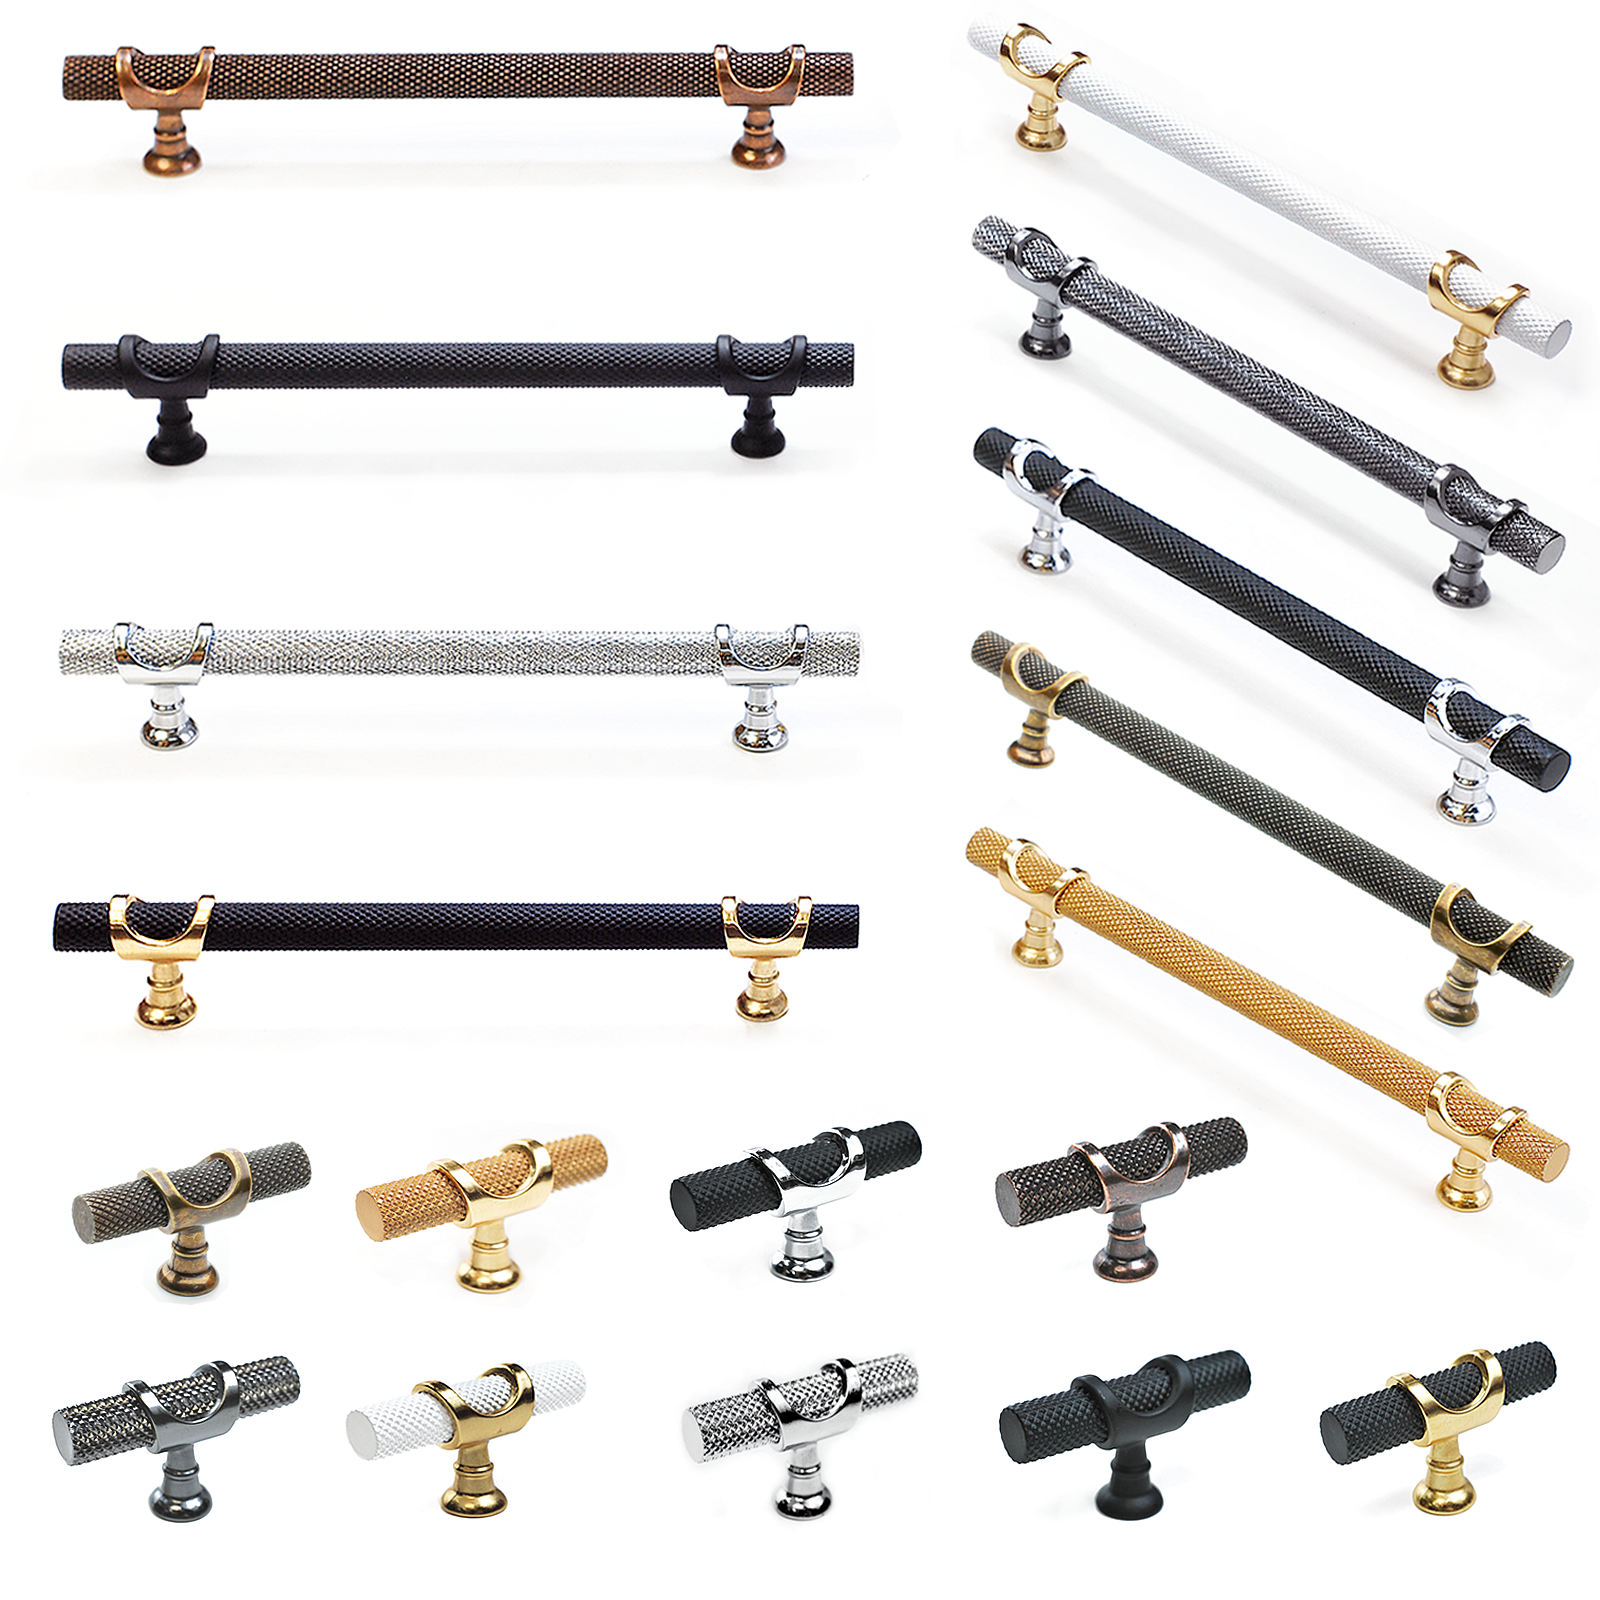 A variety of door knobs and drawer handles in different styles and materials